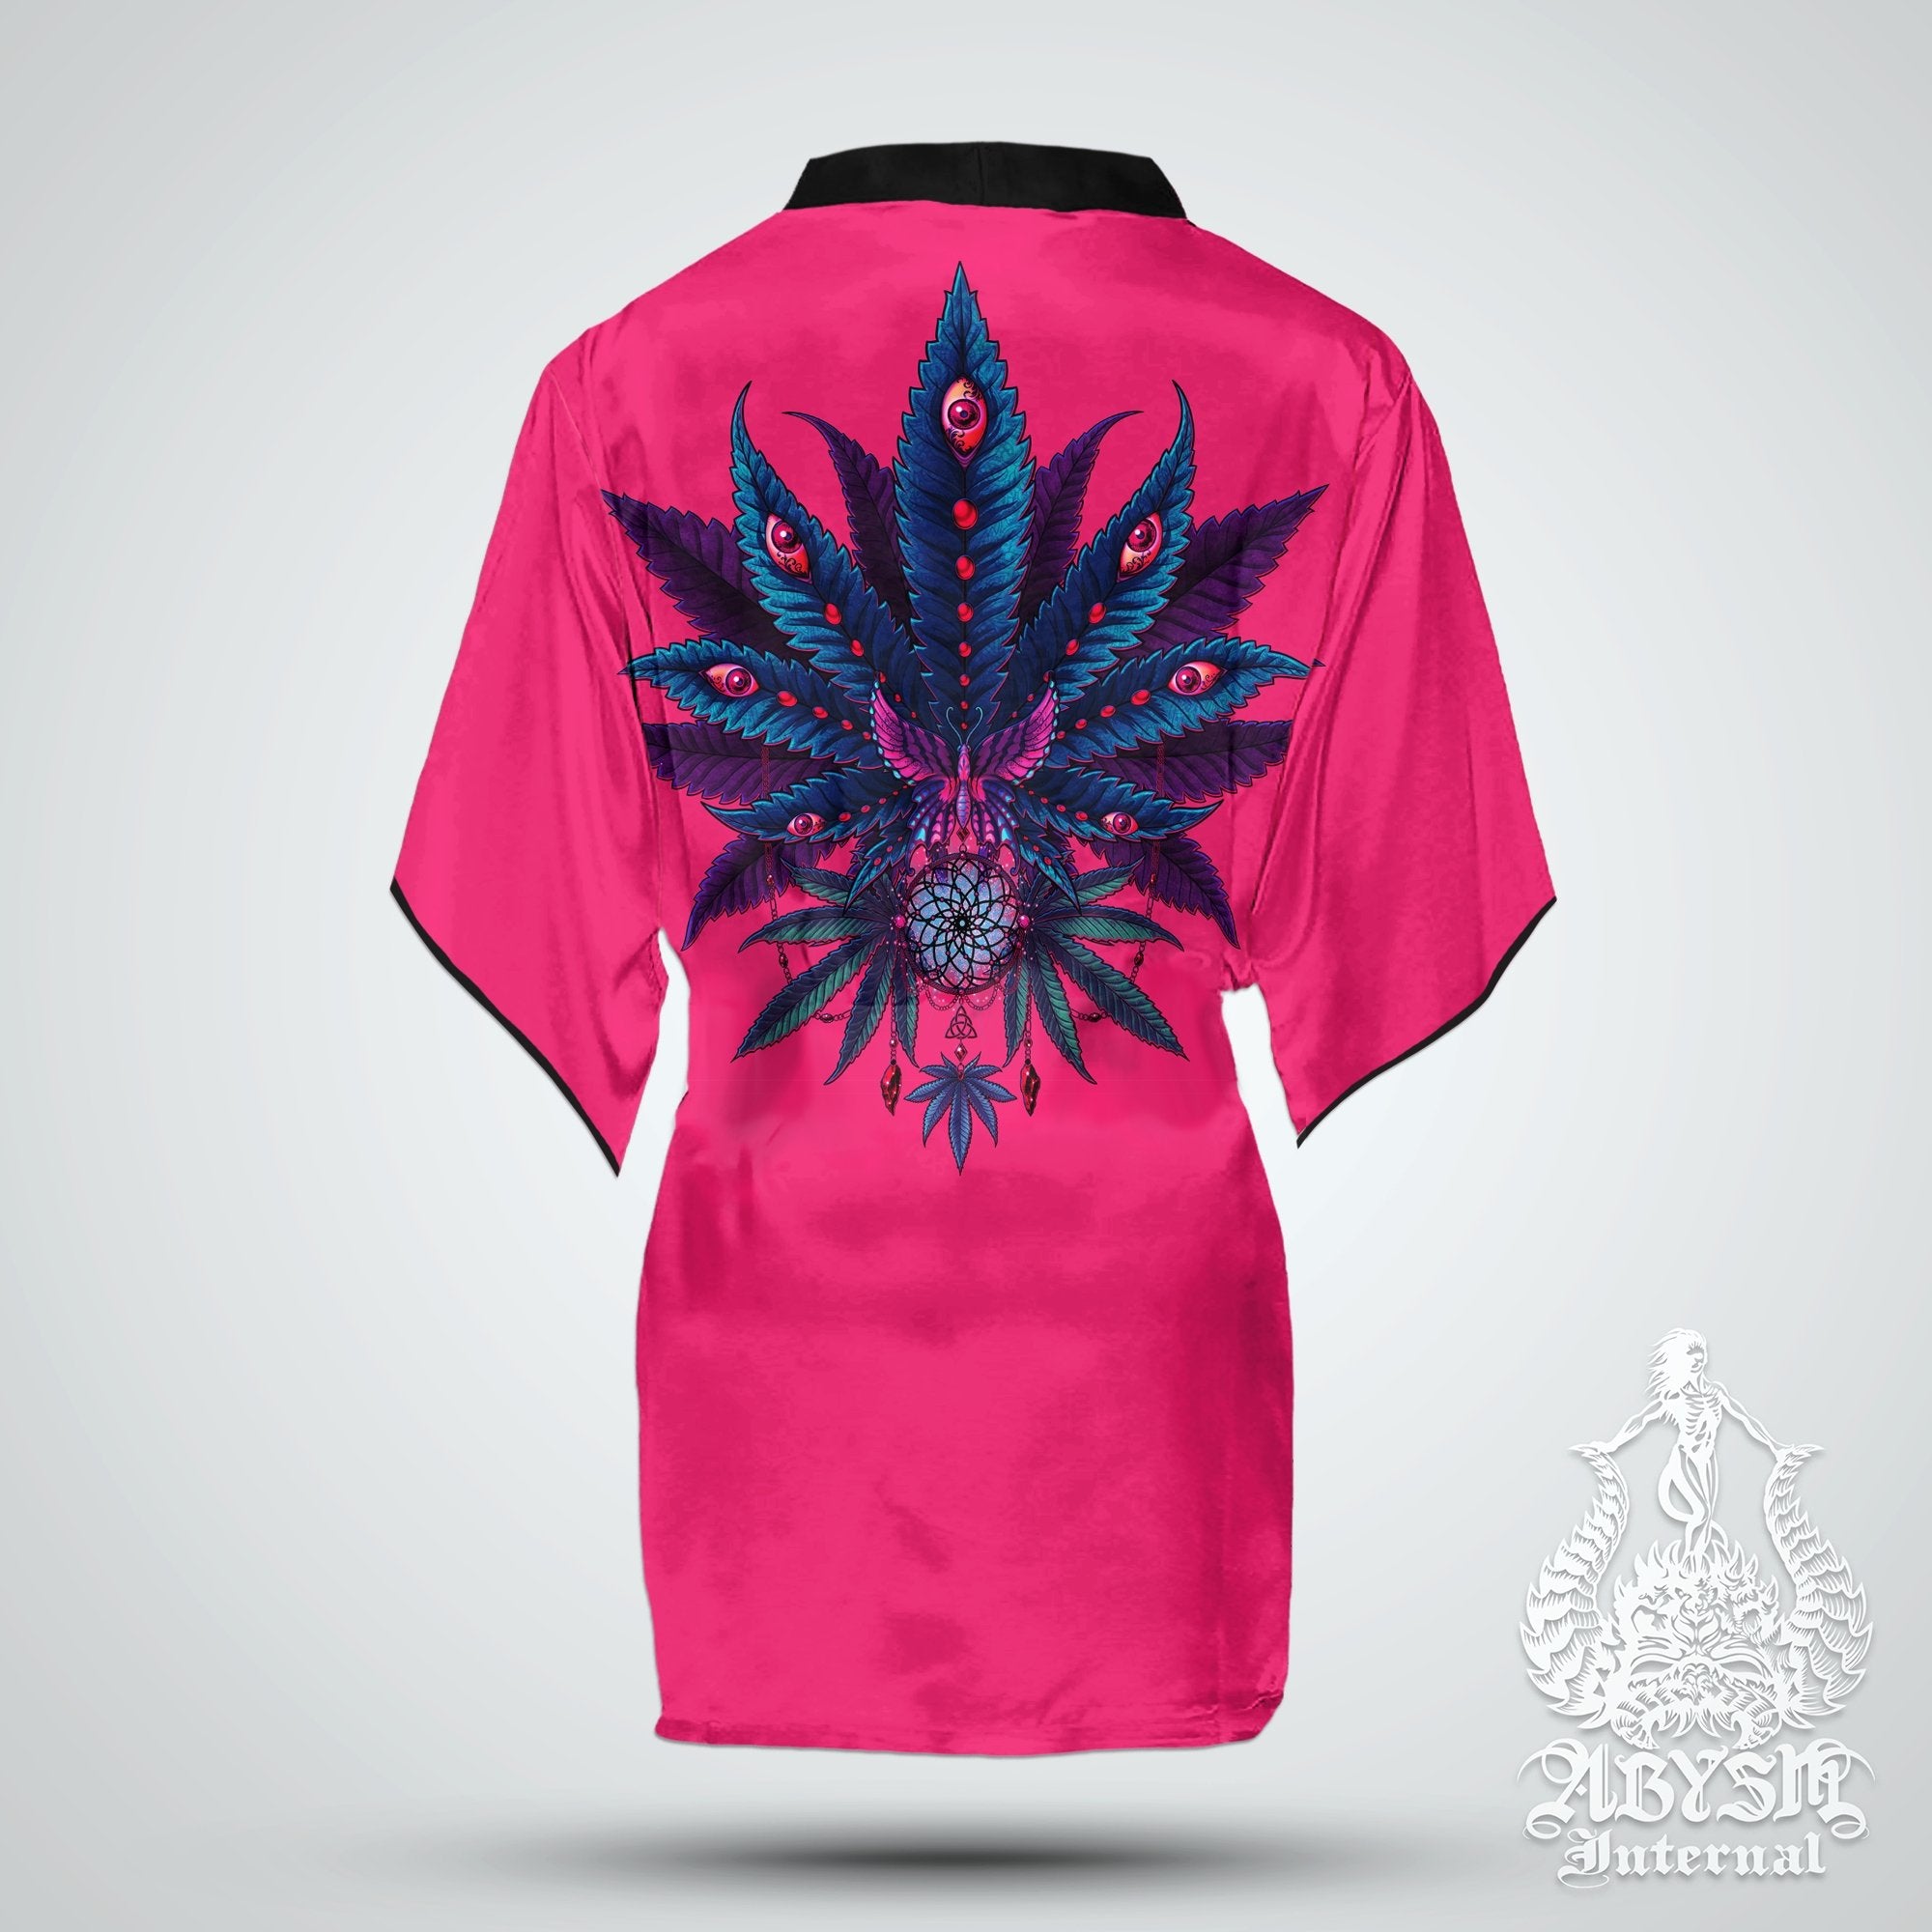 Weed Cover Up, Cannabis Outfit, Neon Party Kimono, Summer Festival Robe, 420 Gift, Alternative Clothing, Unisex - Marijuana I - Abysm Internal